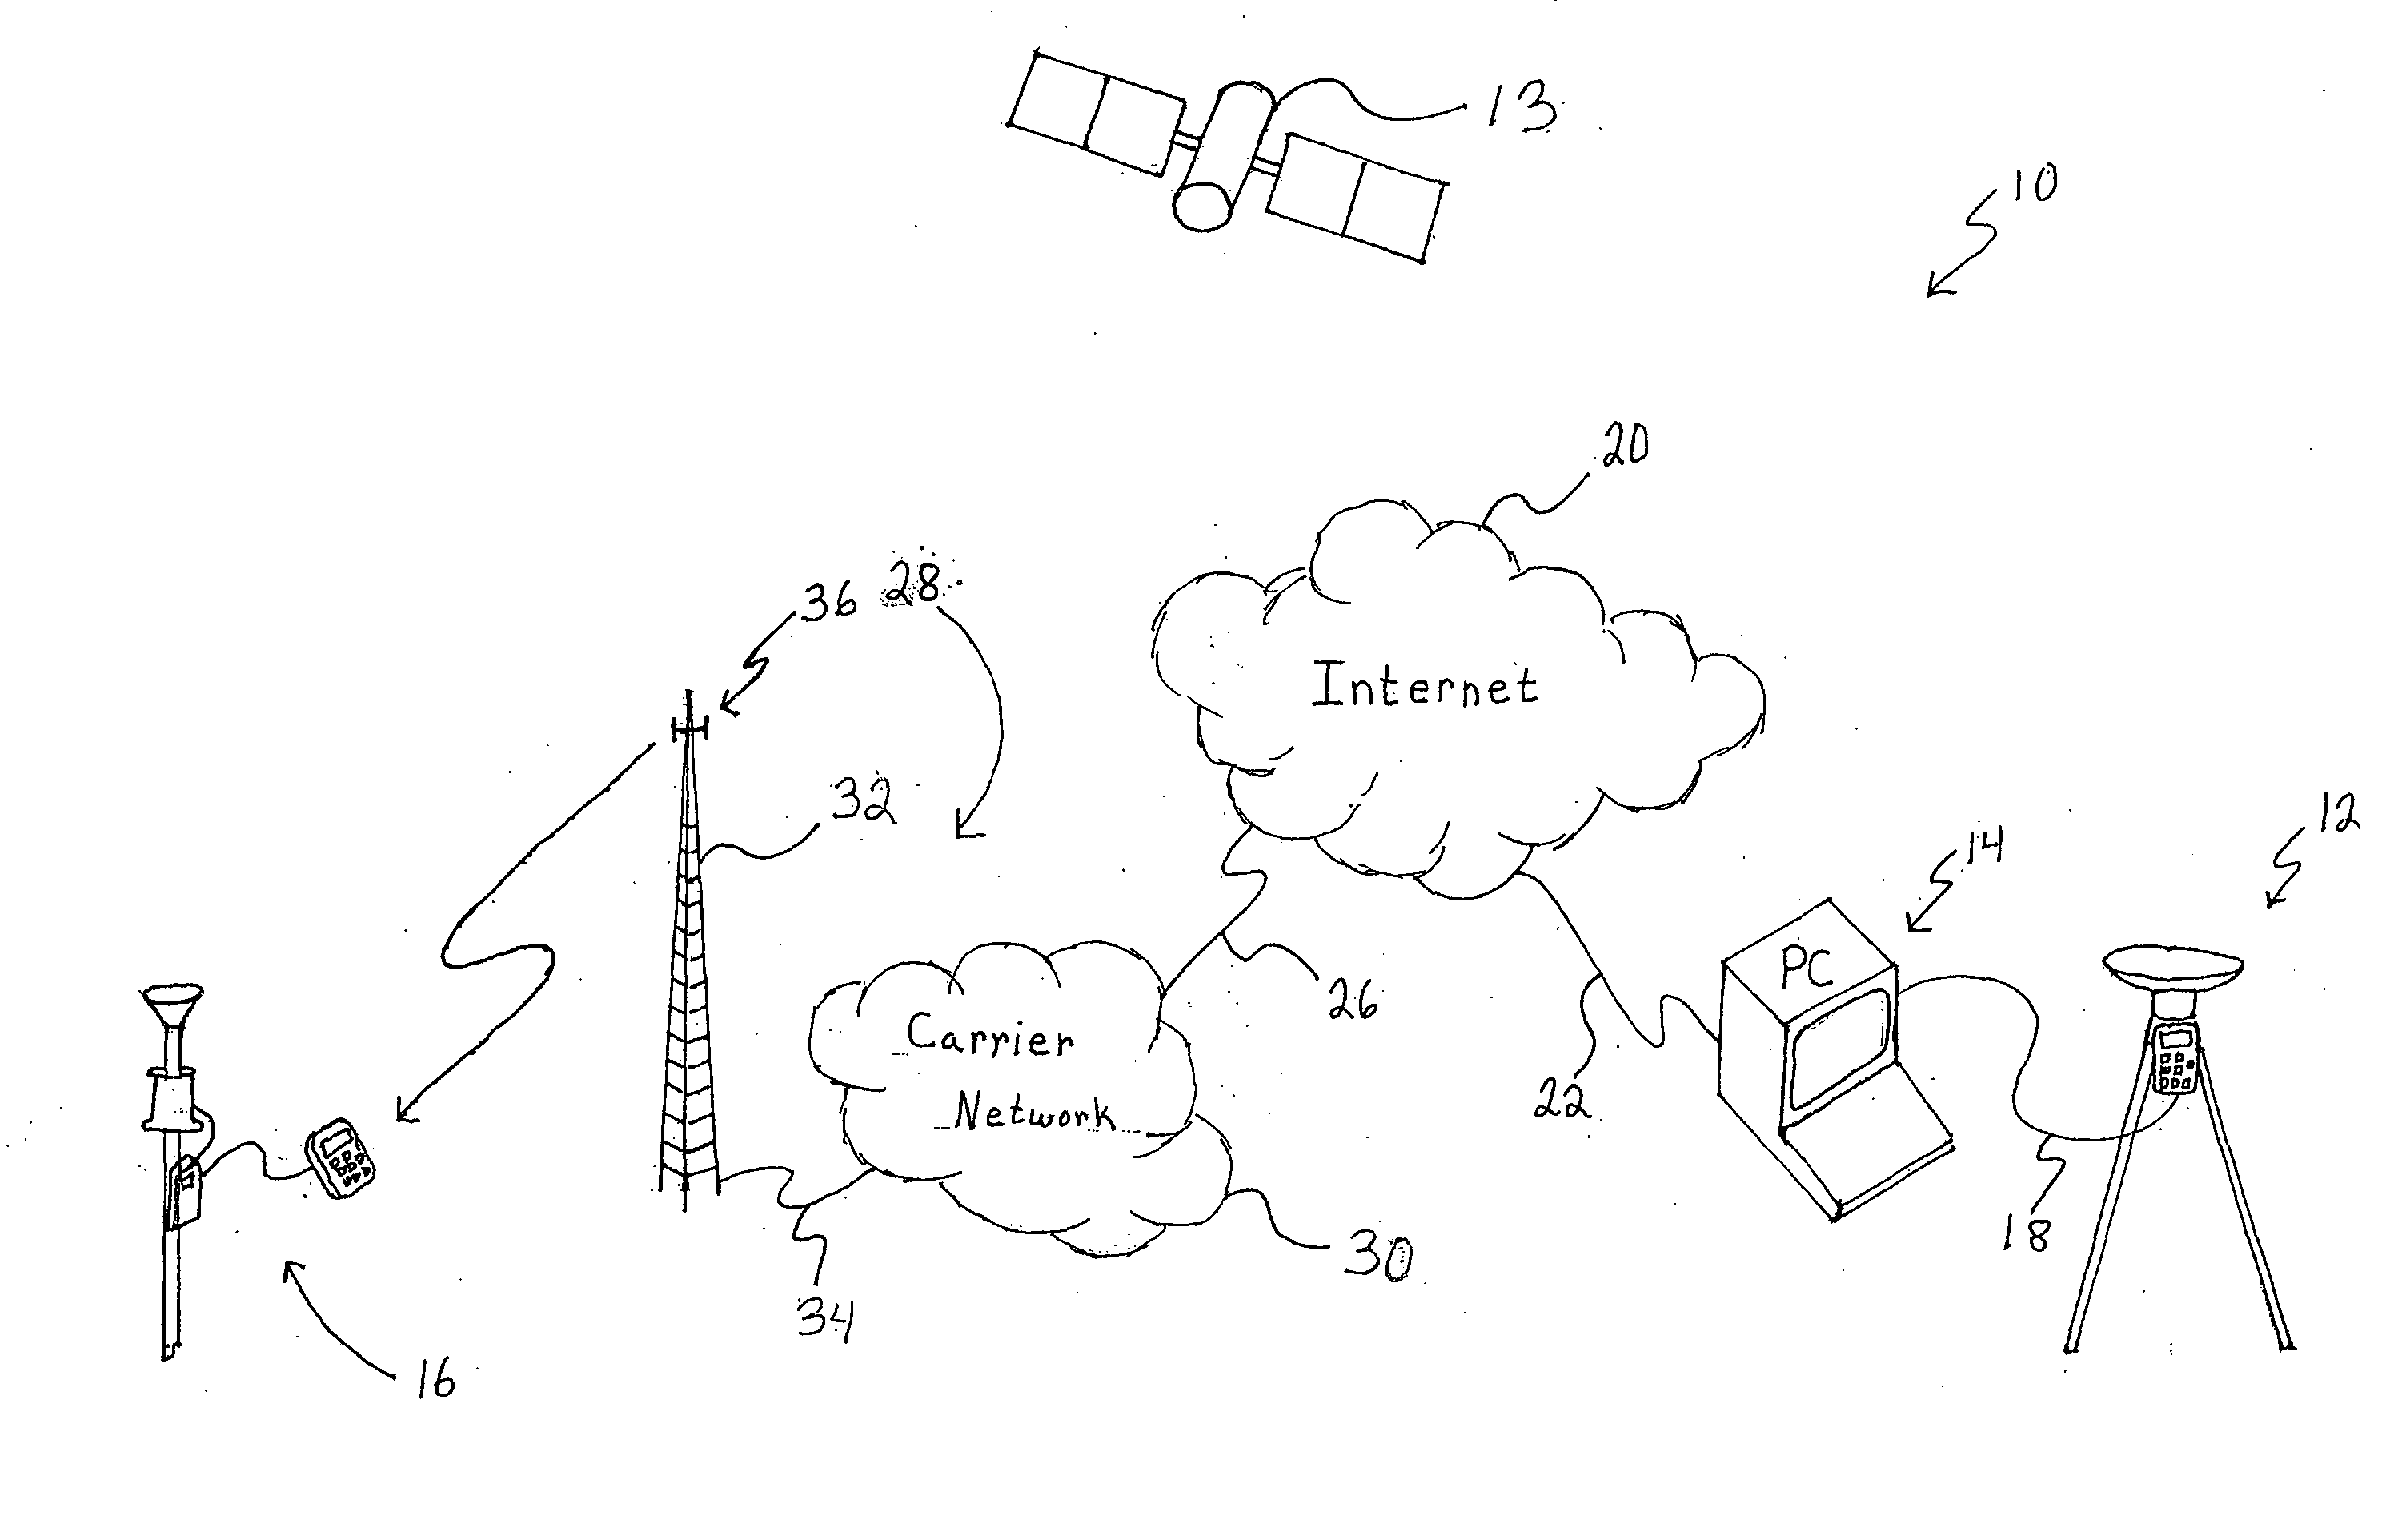 Apparatus, system, method, and program for wireless GPS surveying